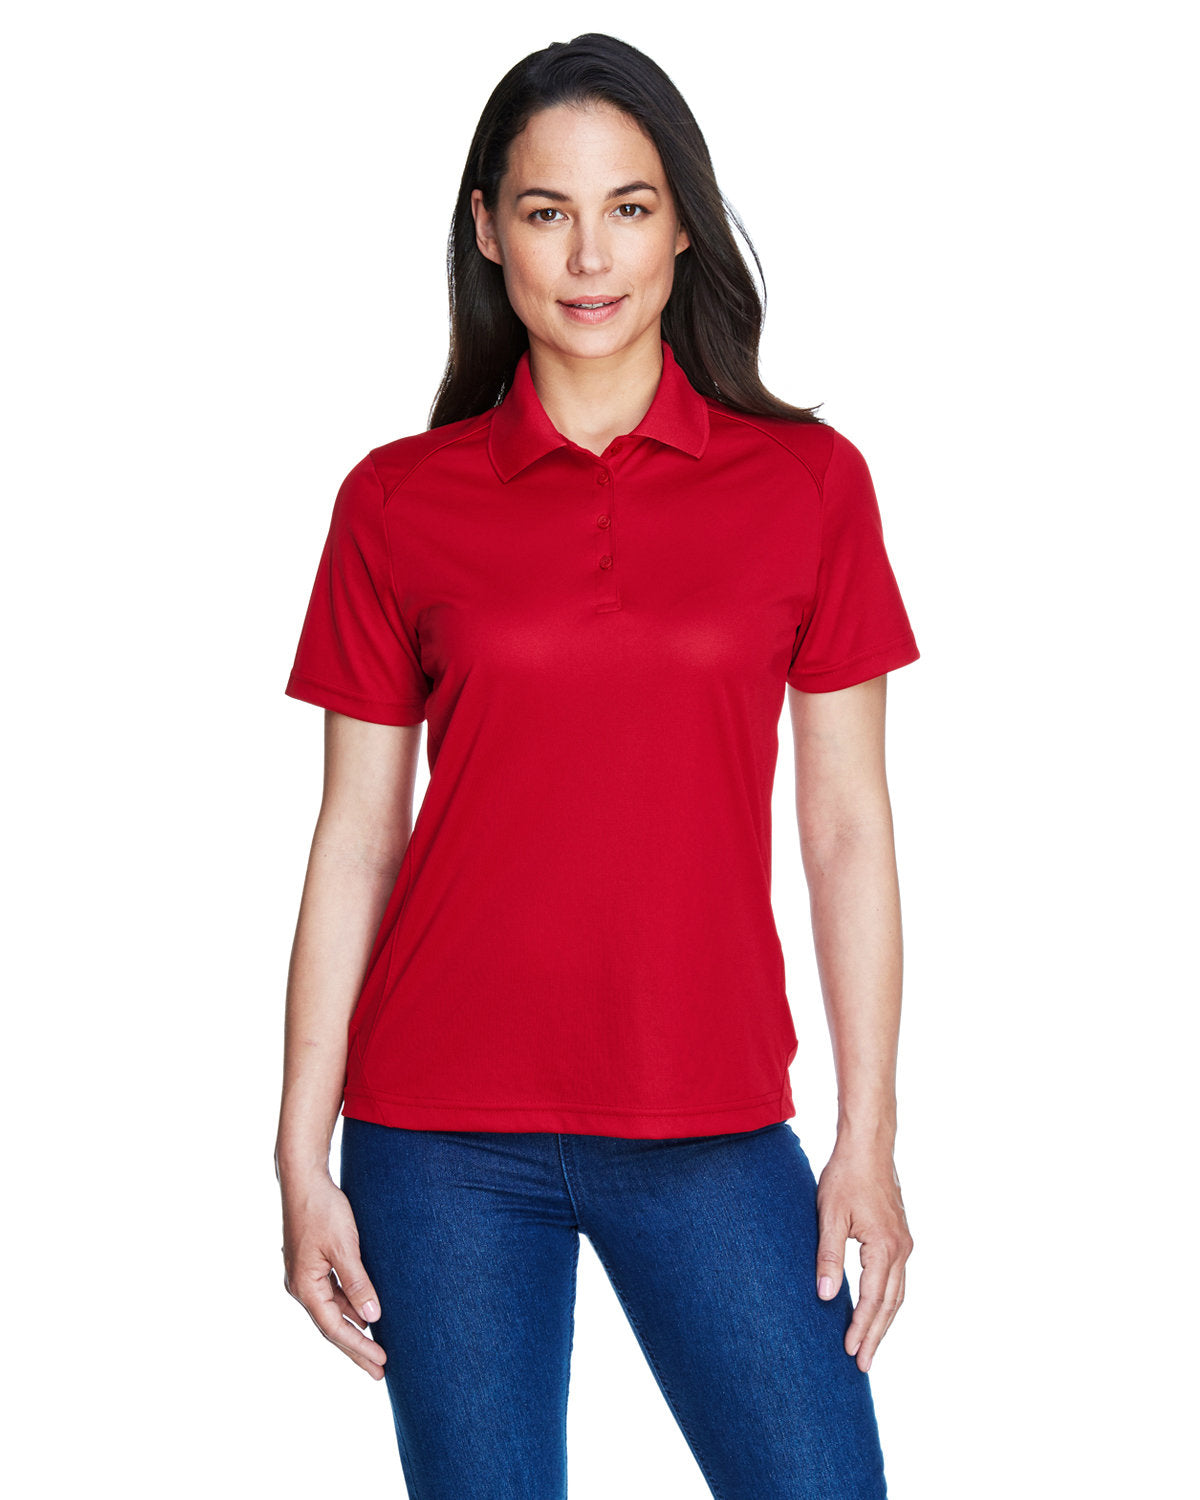 Ladies' Extreme Eperformance Shield Polo Shirt: Uncompromising Style